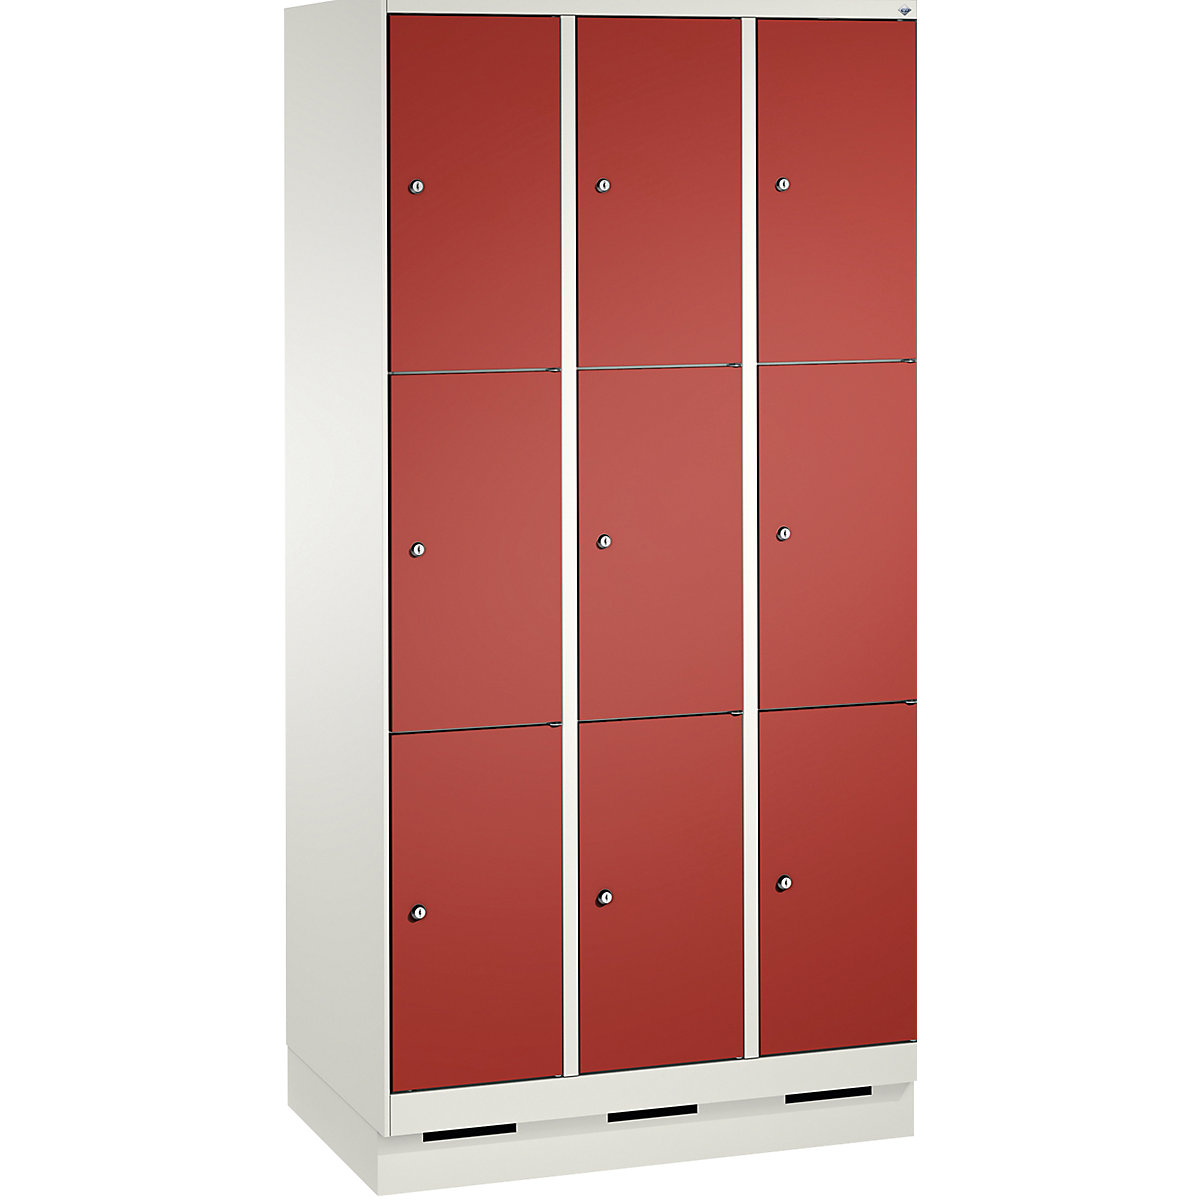 EVOLO locker unit, with plinth – C+P, 3 compartments, 3 shelf compartments each, compartment width 300 mm, traffic white / flame red-6